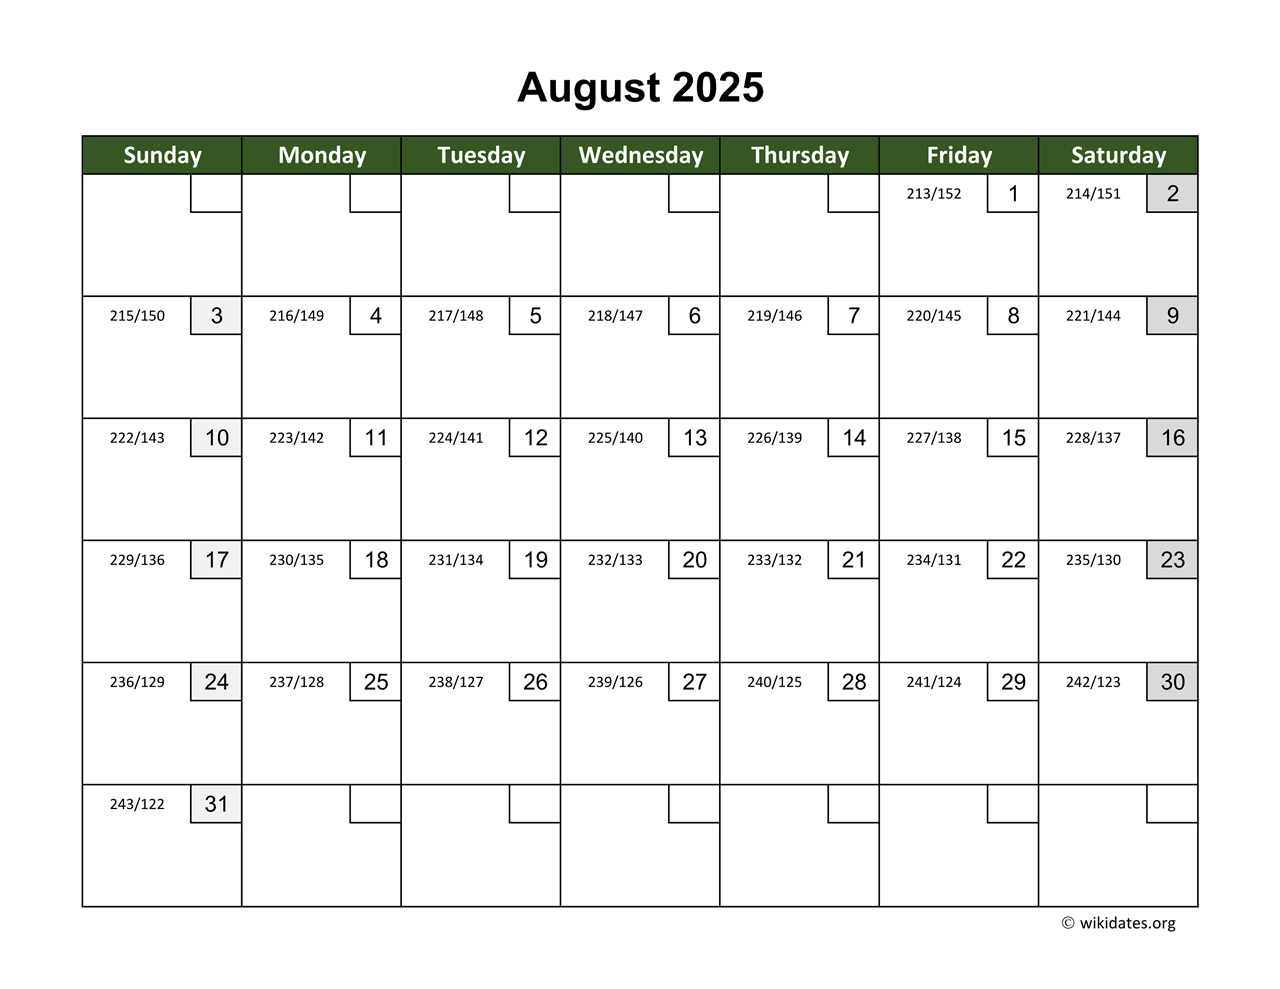 august-2025-calendar-with-day-numbers-wikidates